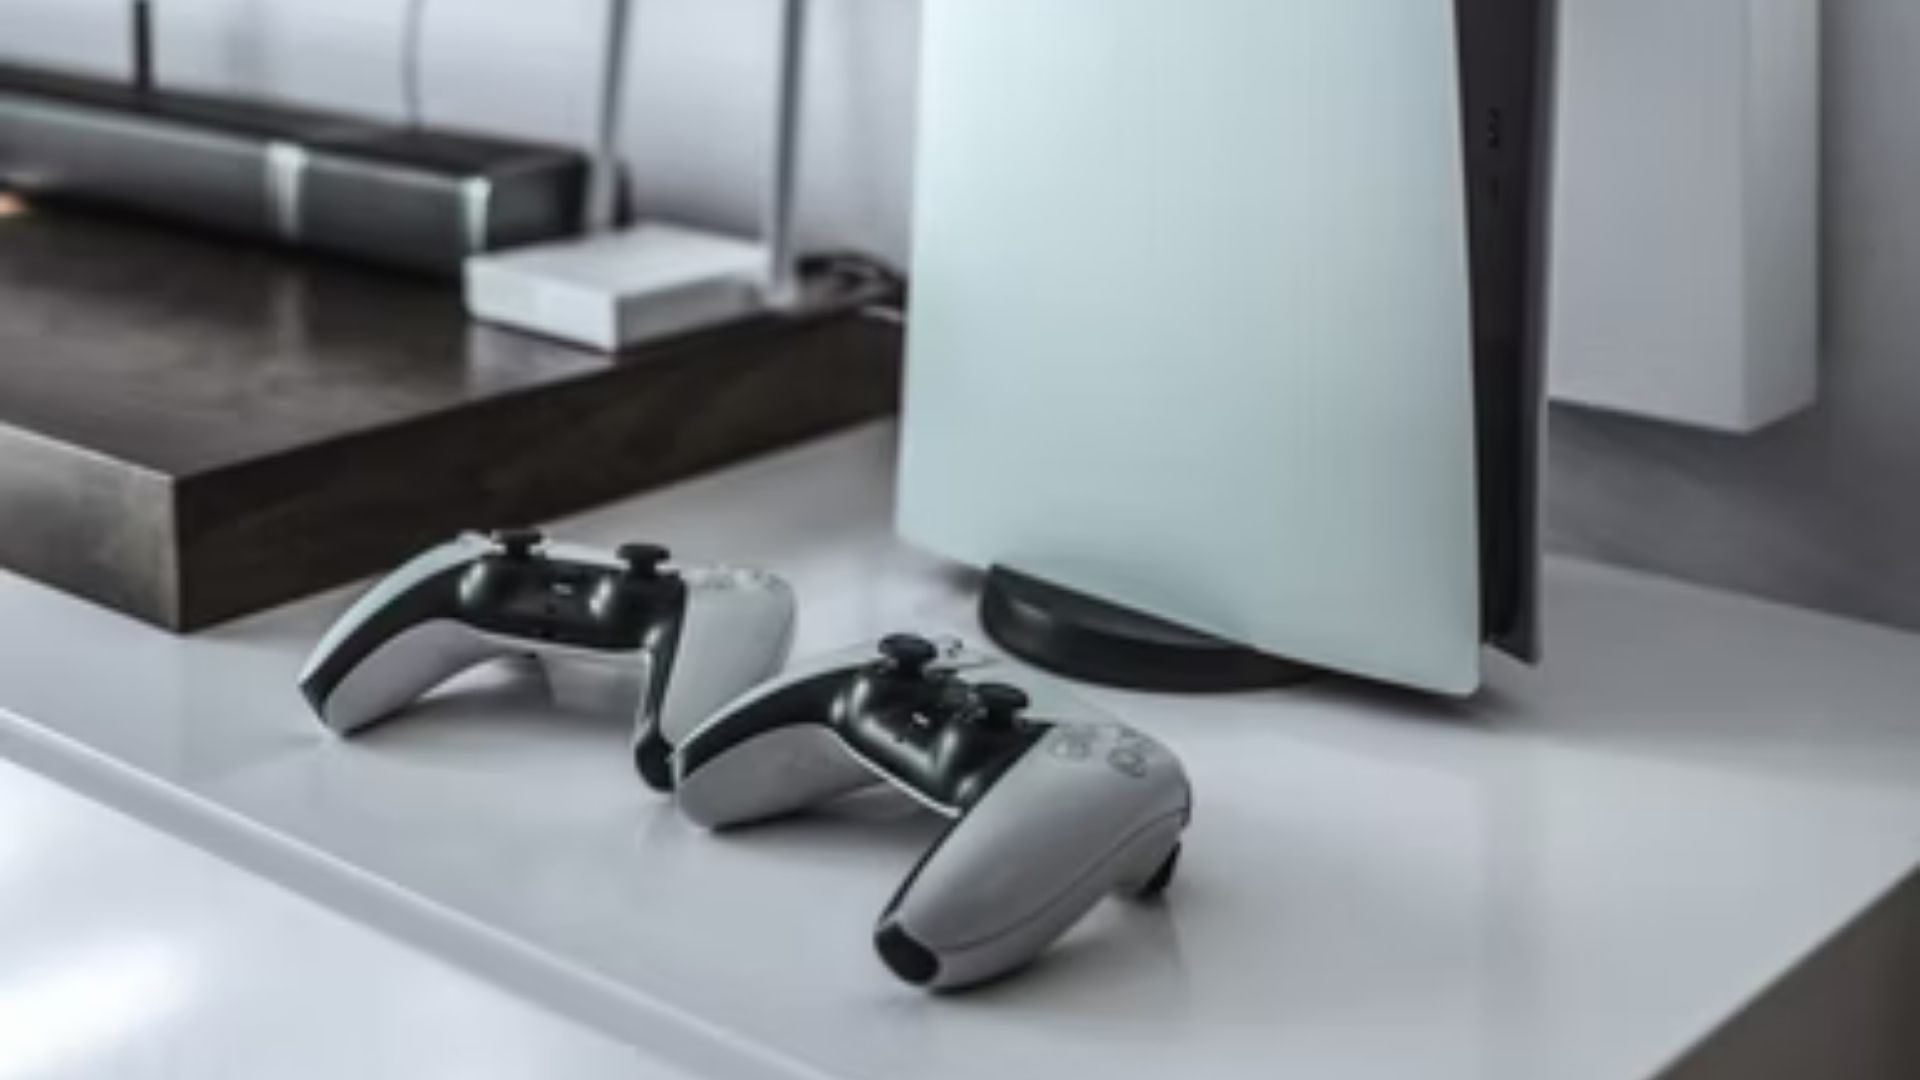 playstation 5 console on an entertainment center, with two dualsense controllers in front of it